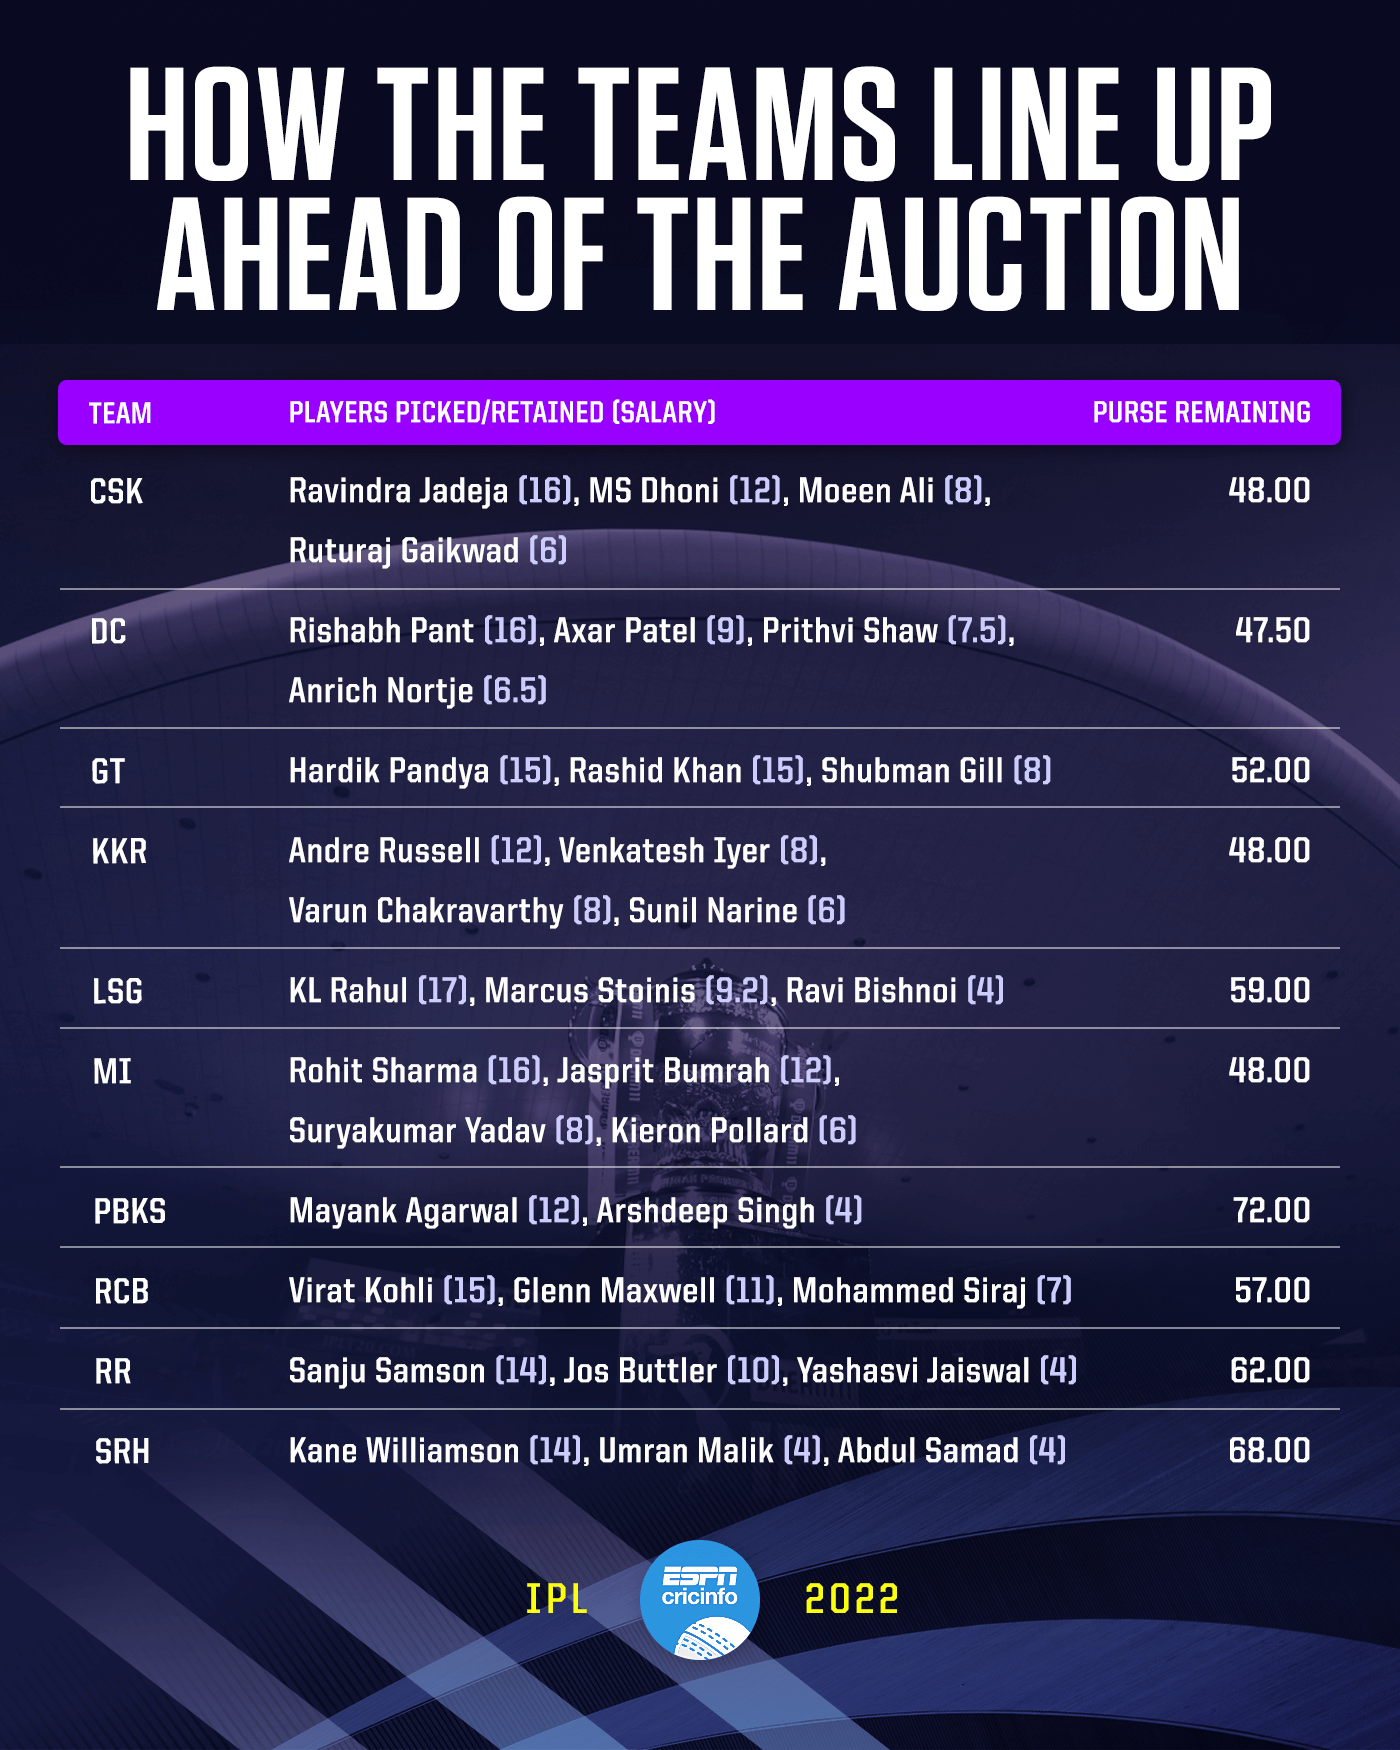 Ipl Schedule Of 2022 Faqs - All You Wanted To Know About The Ipl 2022 Auction